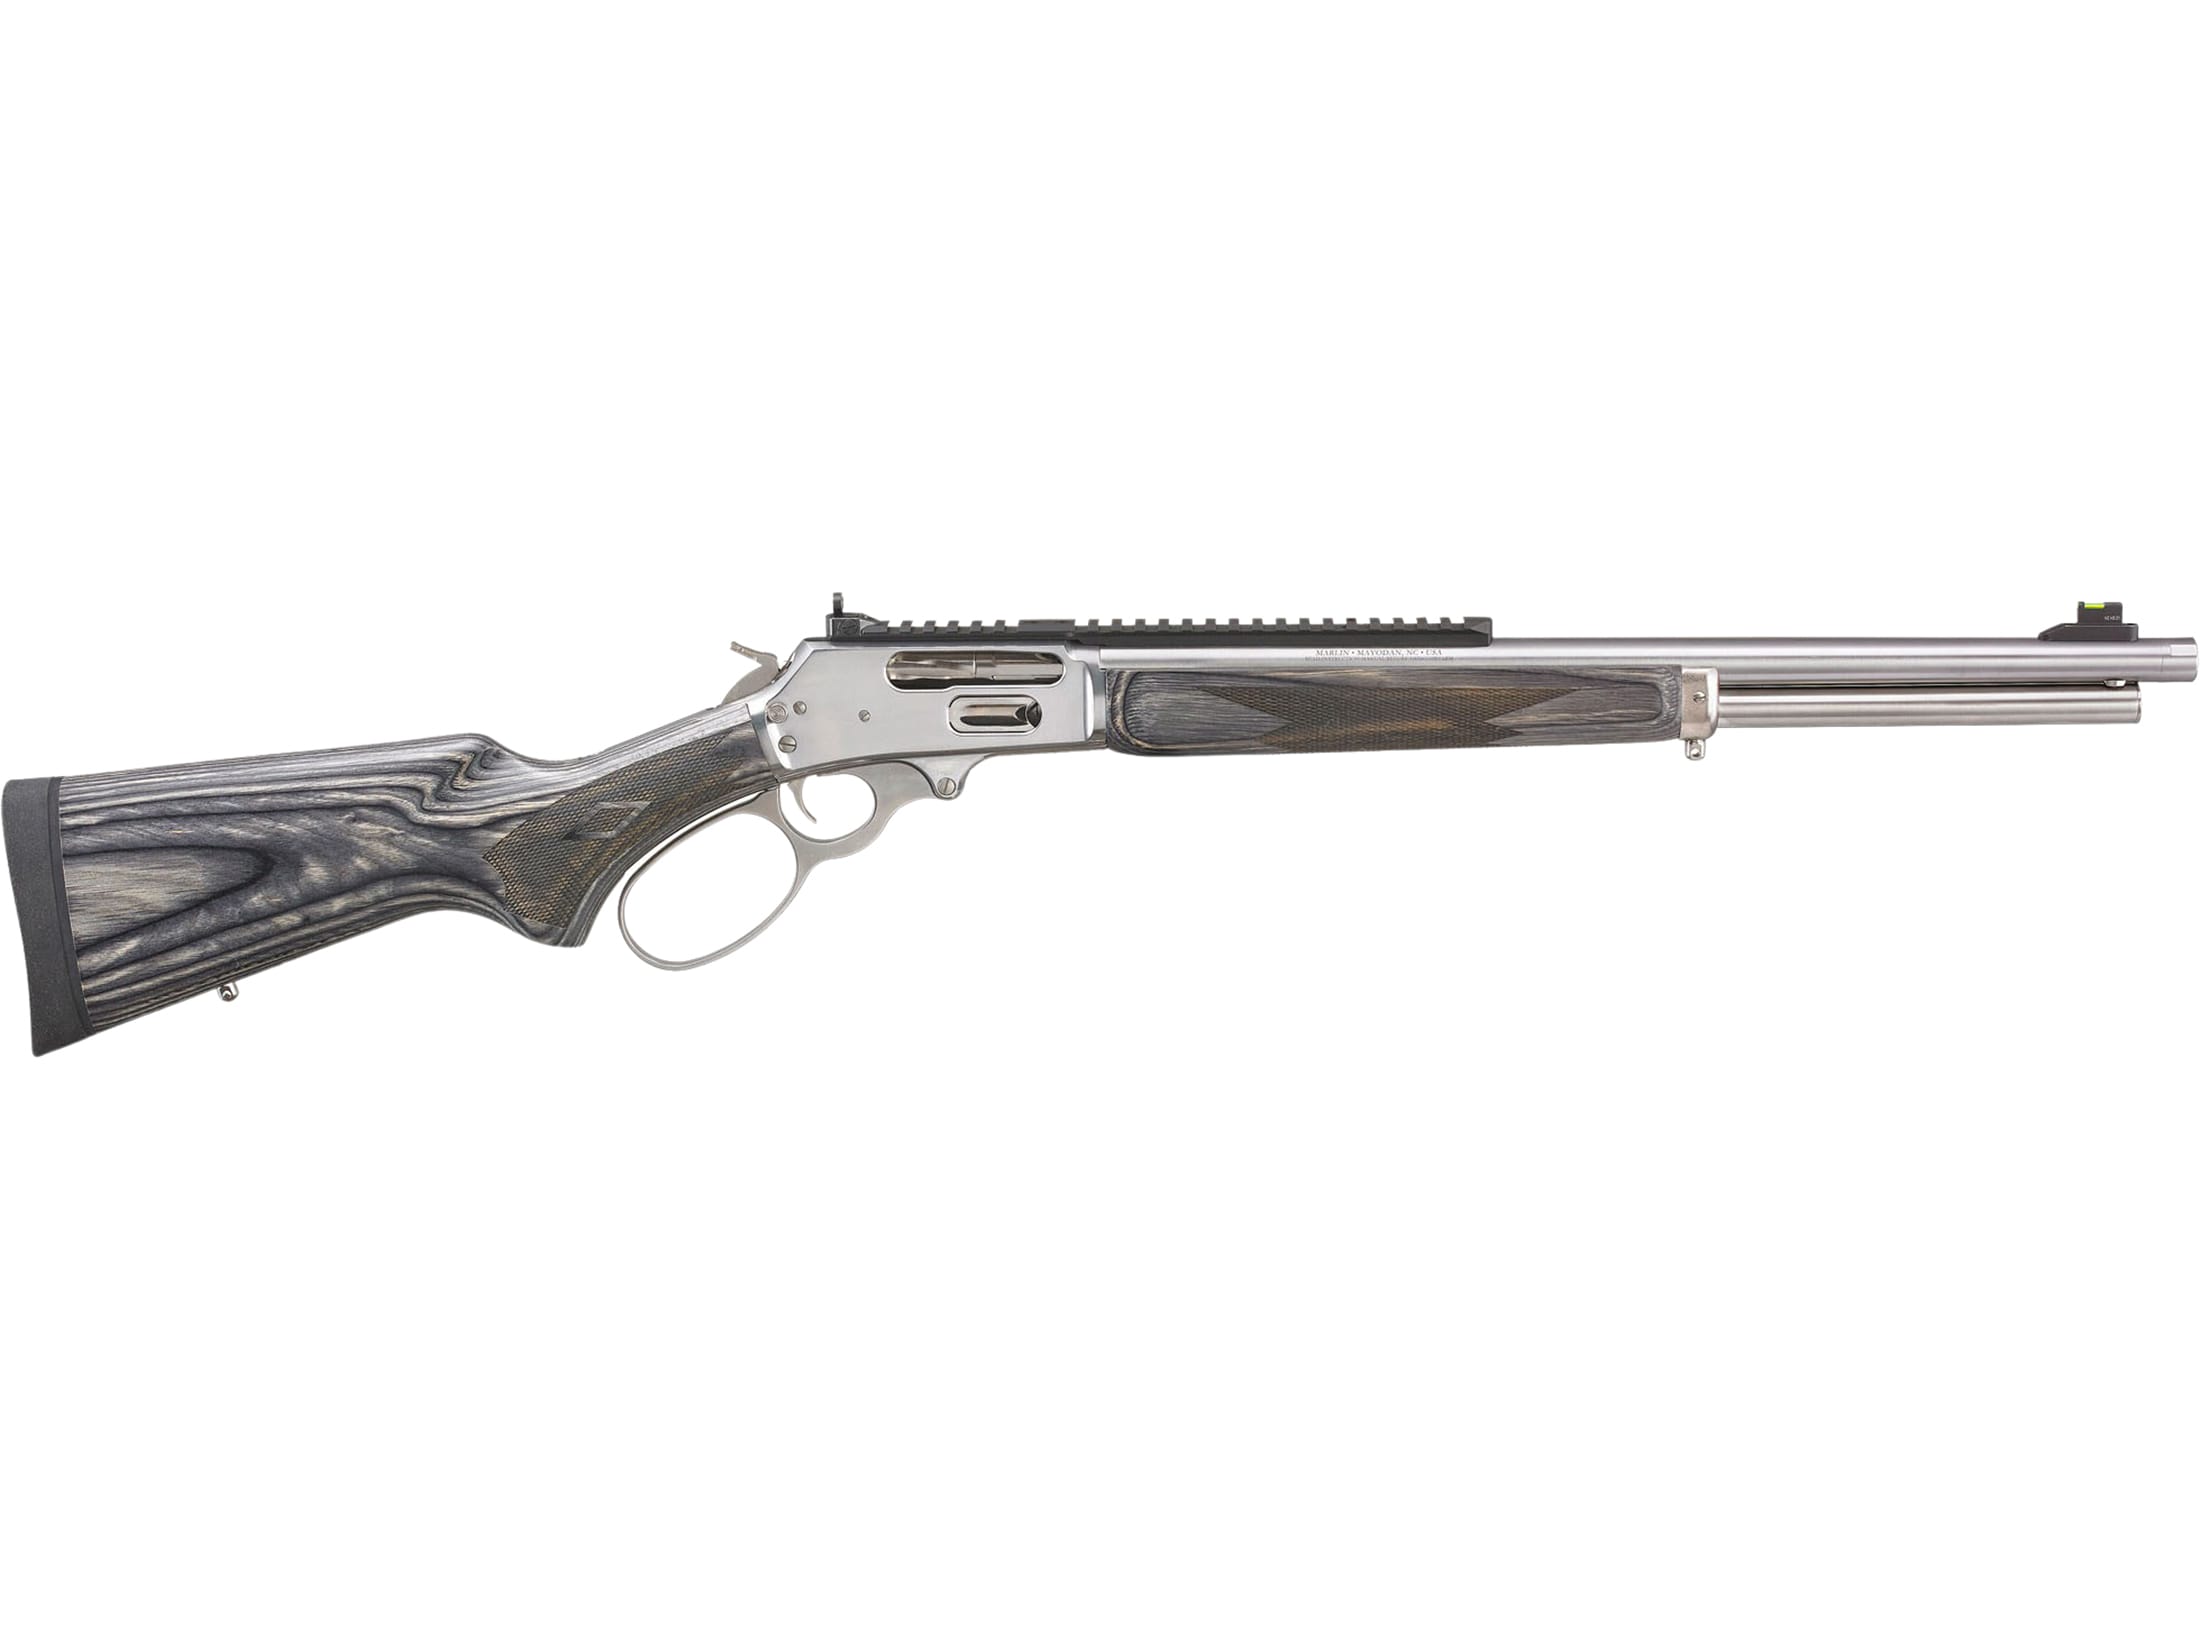 Marlin 1895 SBL Lever Action Centerfire Rifle In Stock Now | Don't Miss Out | tacticalfirearmsandarchery.com